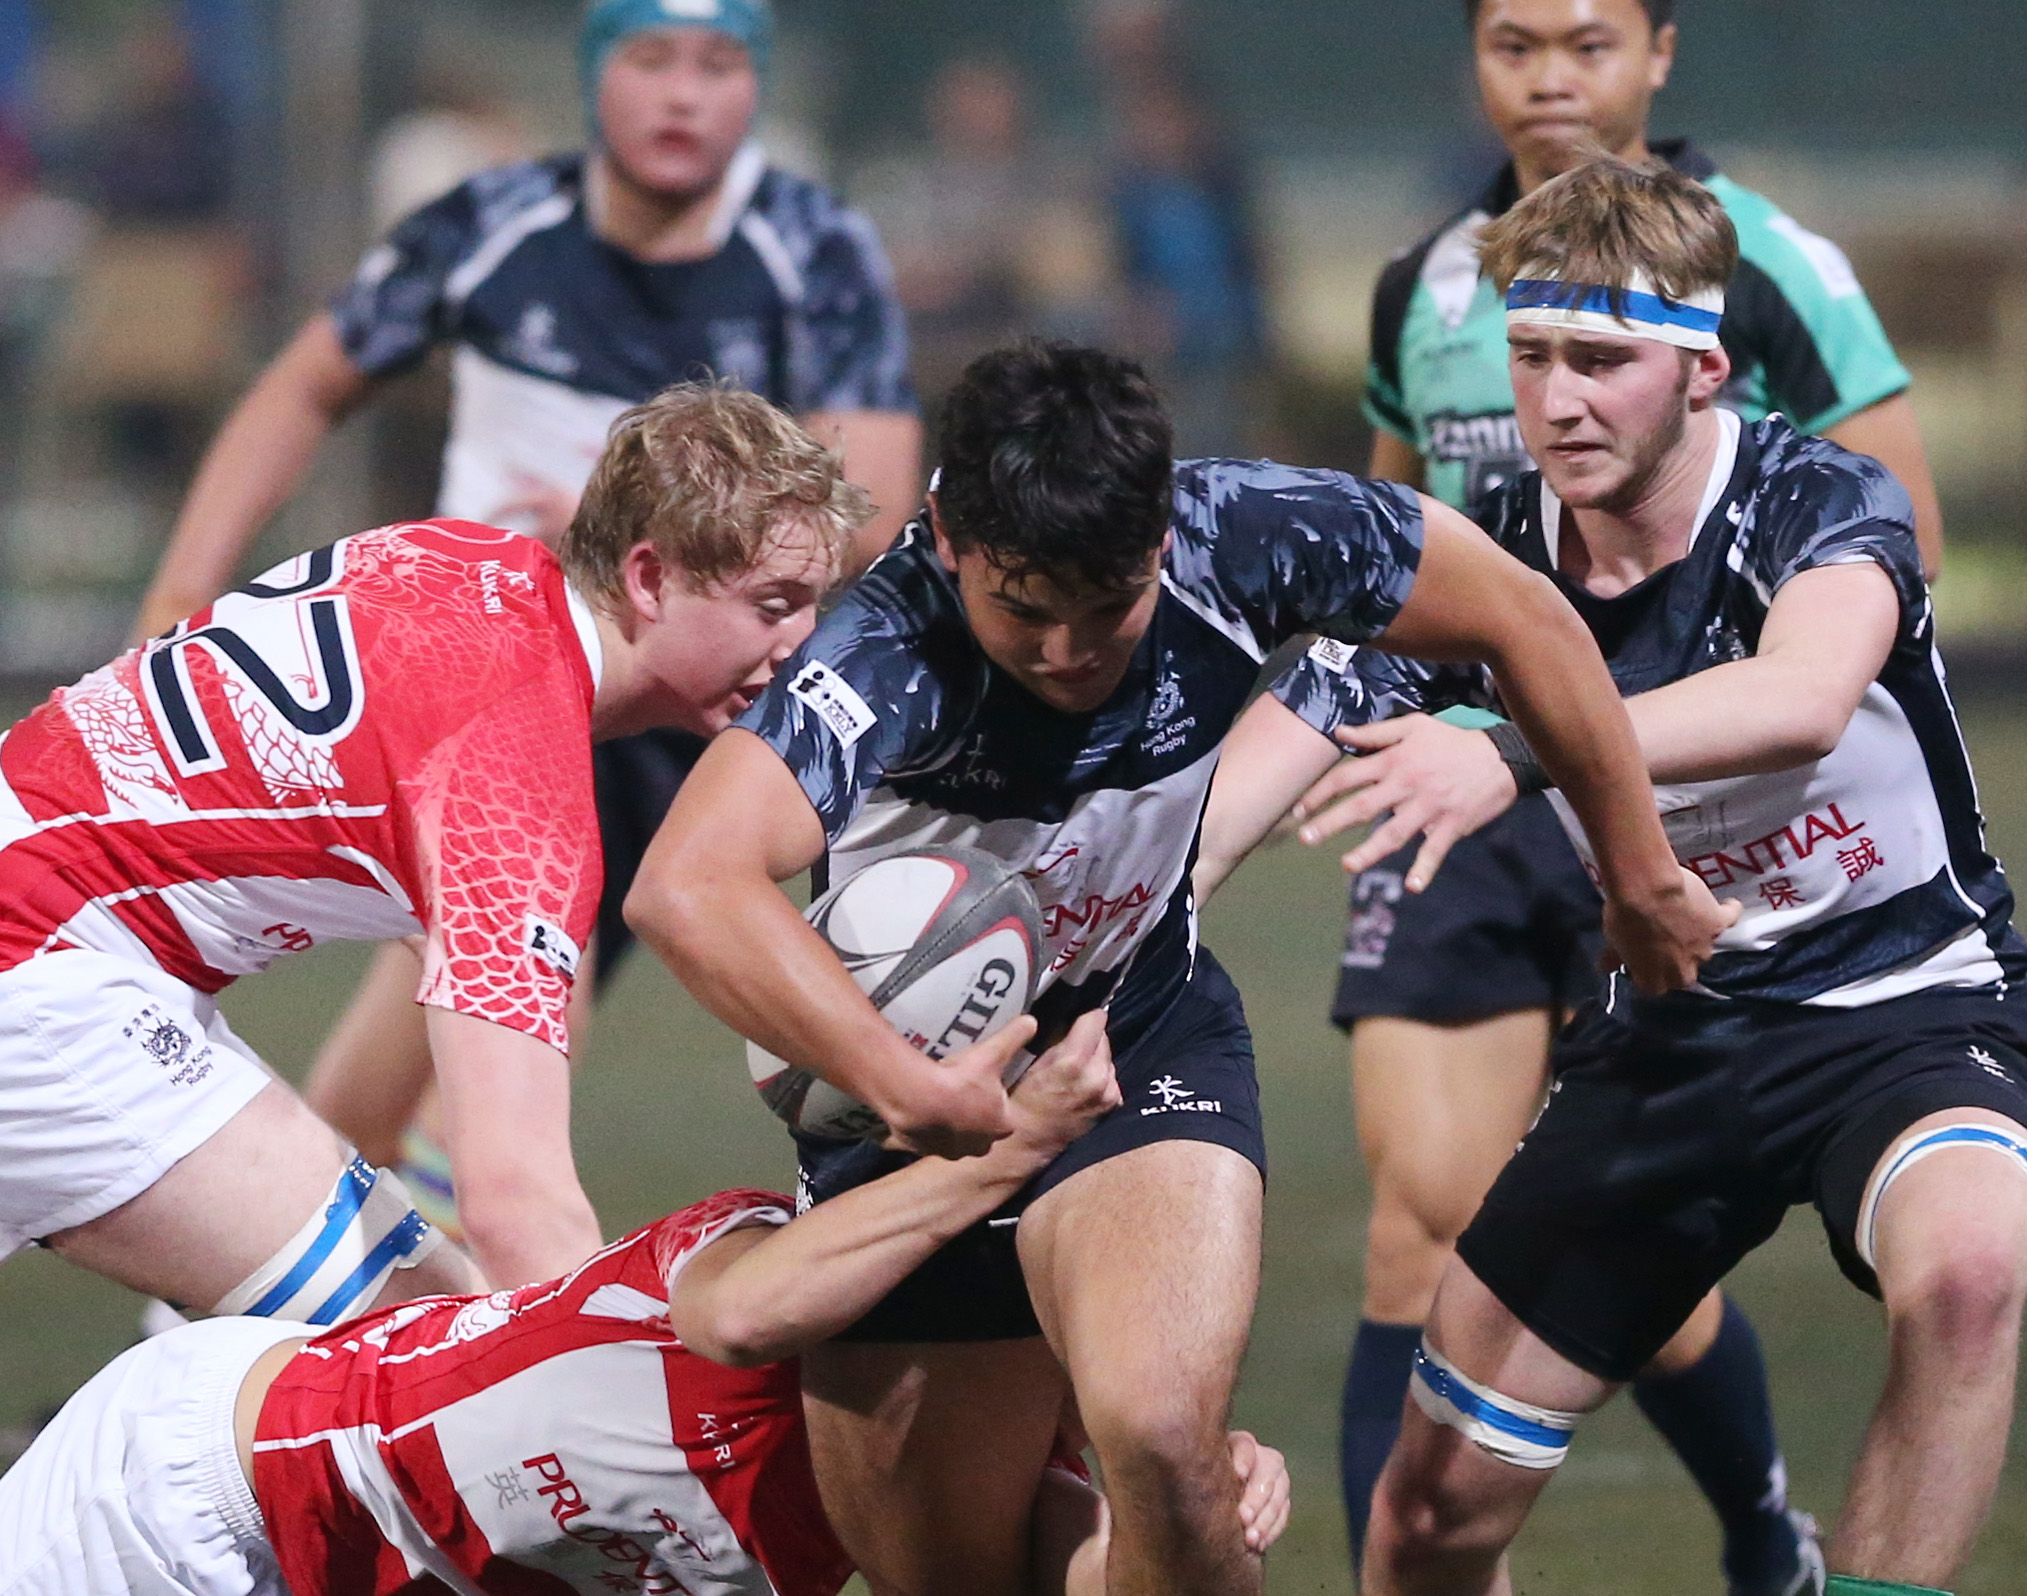 Hong Kong Dragons’ Zak Baldwin (left, in red) goes in to tackle Sam Walsh of the Overseas Lions during Friday's U19 Boys match in the New Year's Day Youth Tournament. Photo: KY Cheng/SCMP